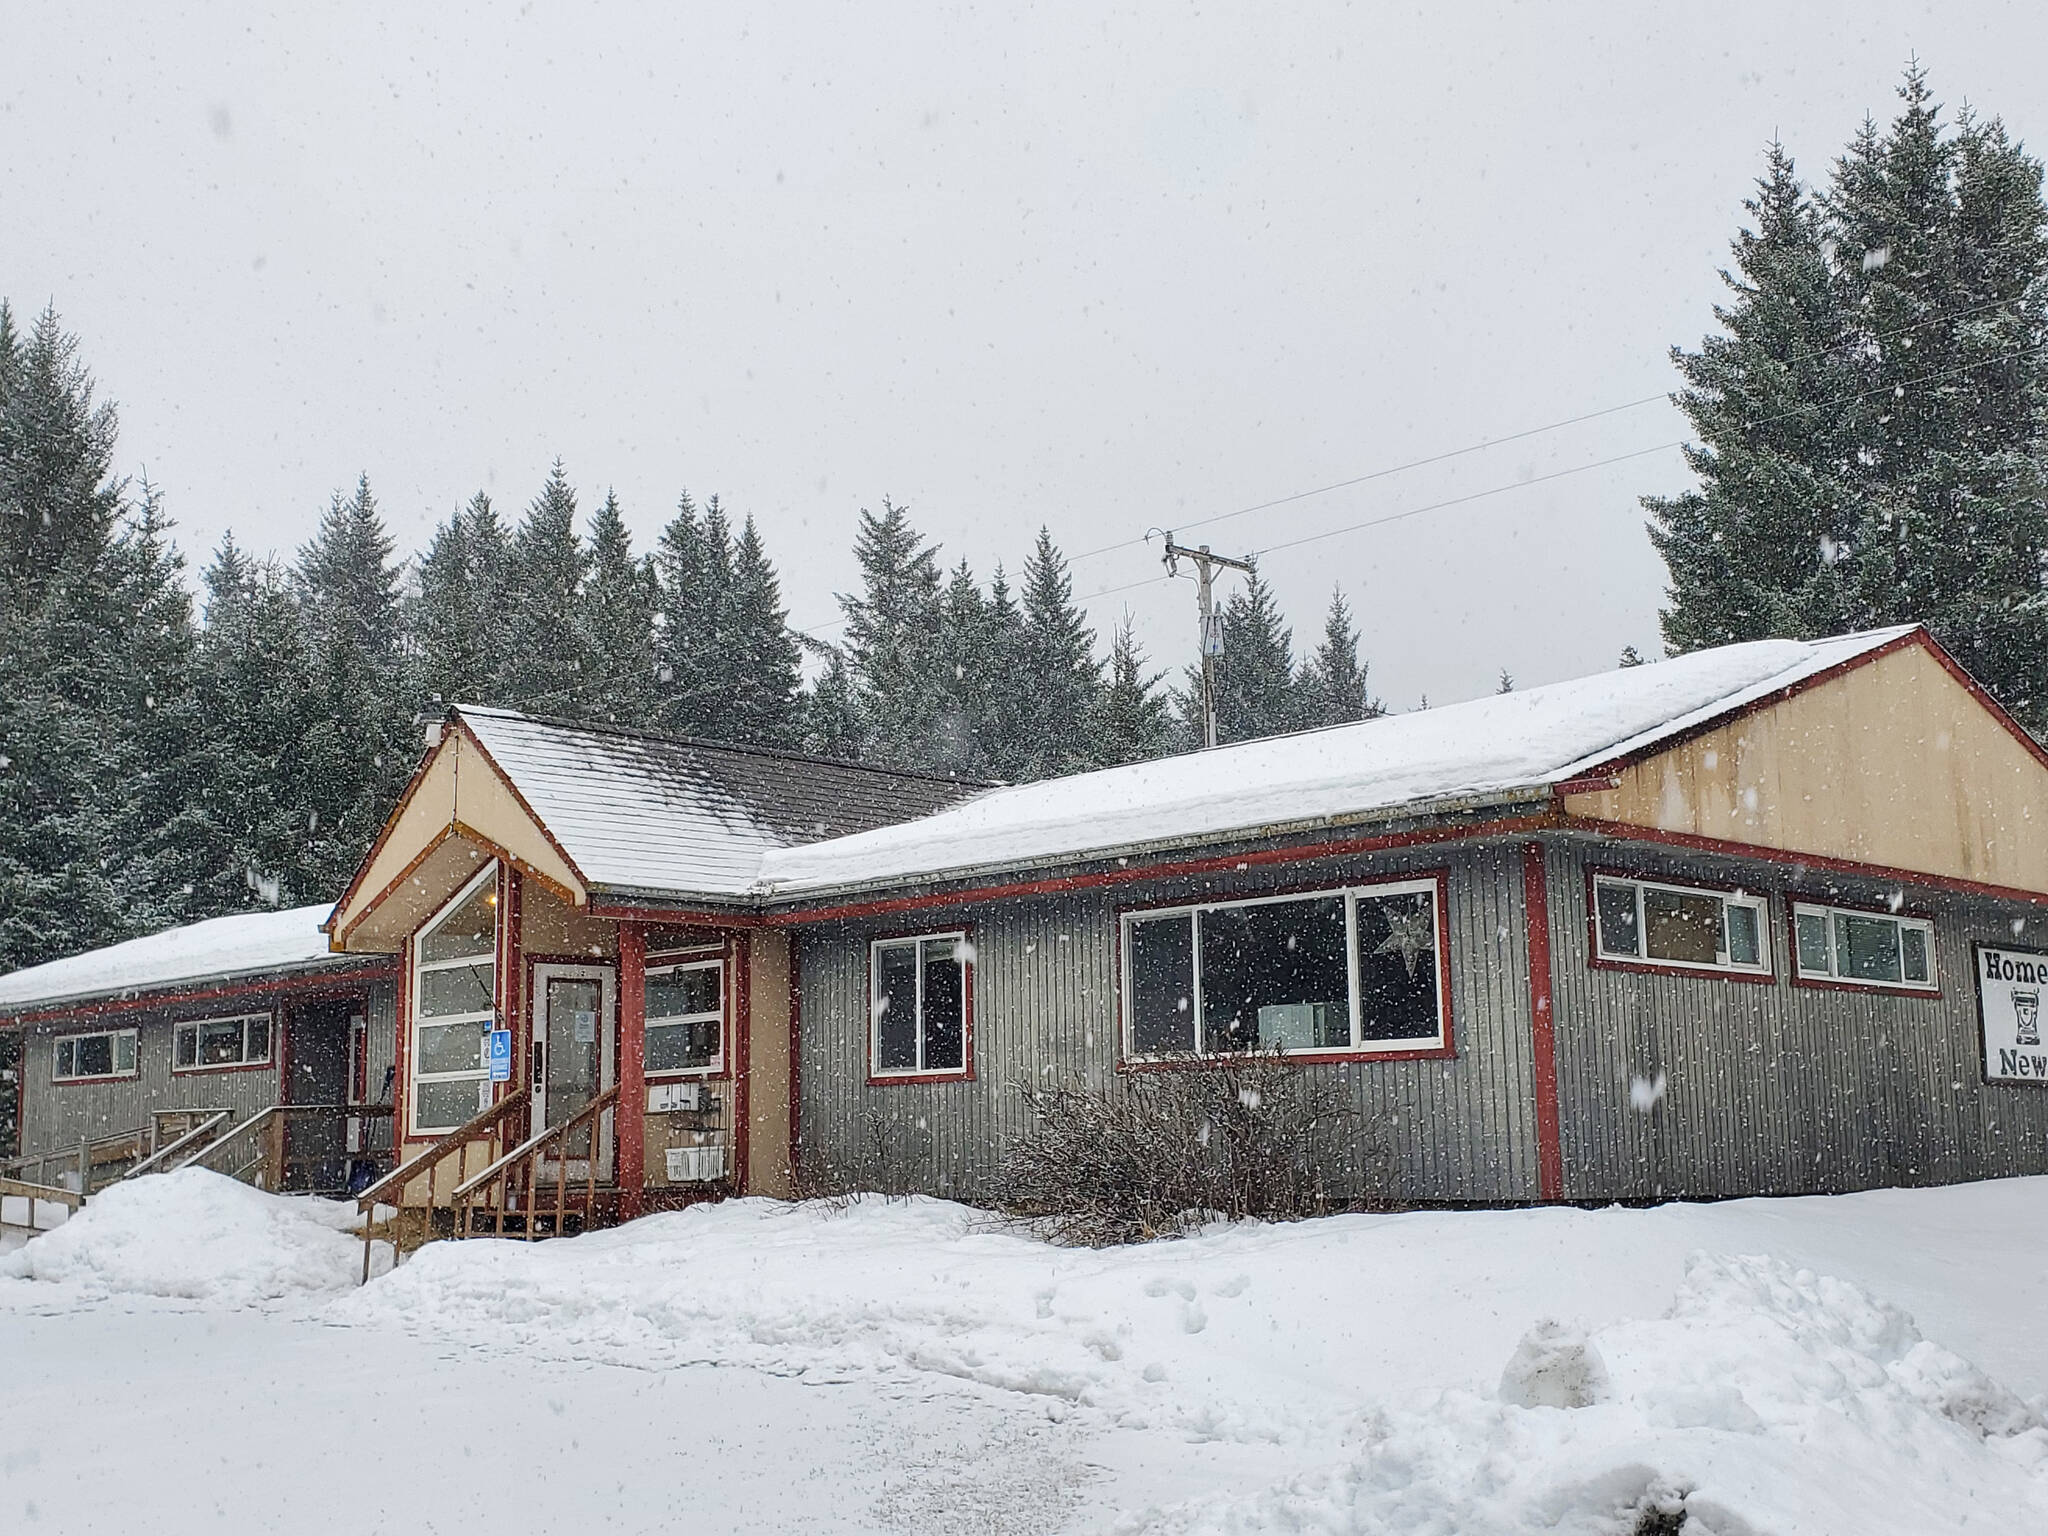 Snow falls at the Homer News office on Thursday<ins>, March 30, 2023 in Homer, Alaska</ins>. (Photo by Delcenia Cosman/Homer News)